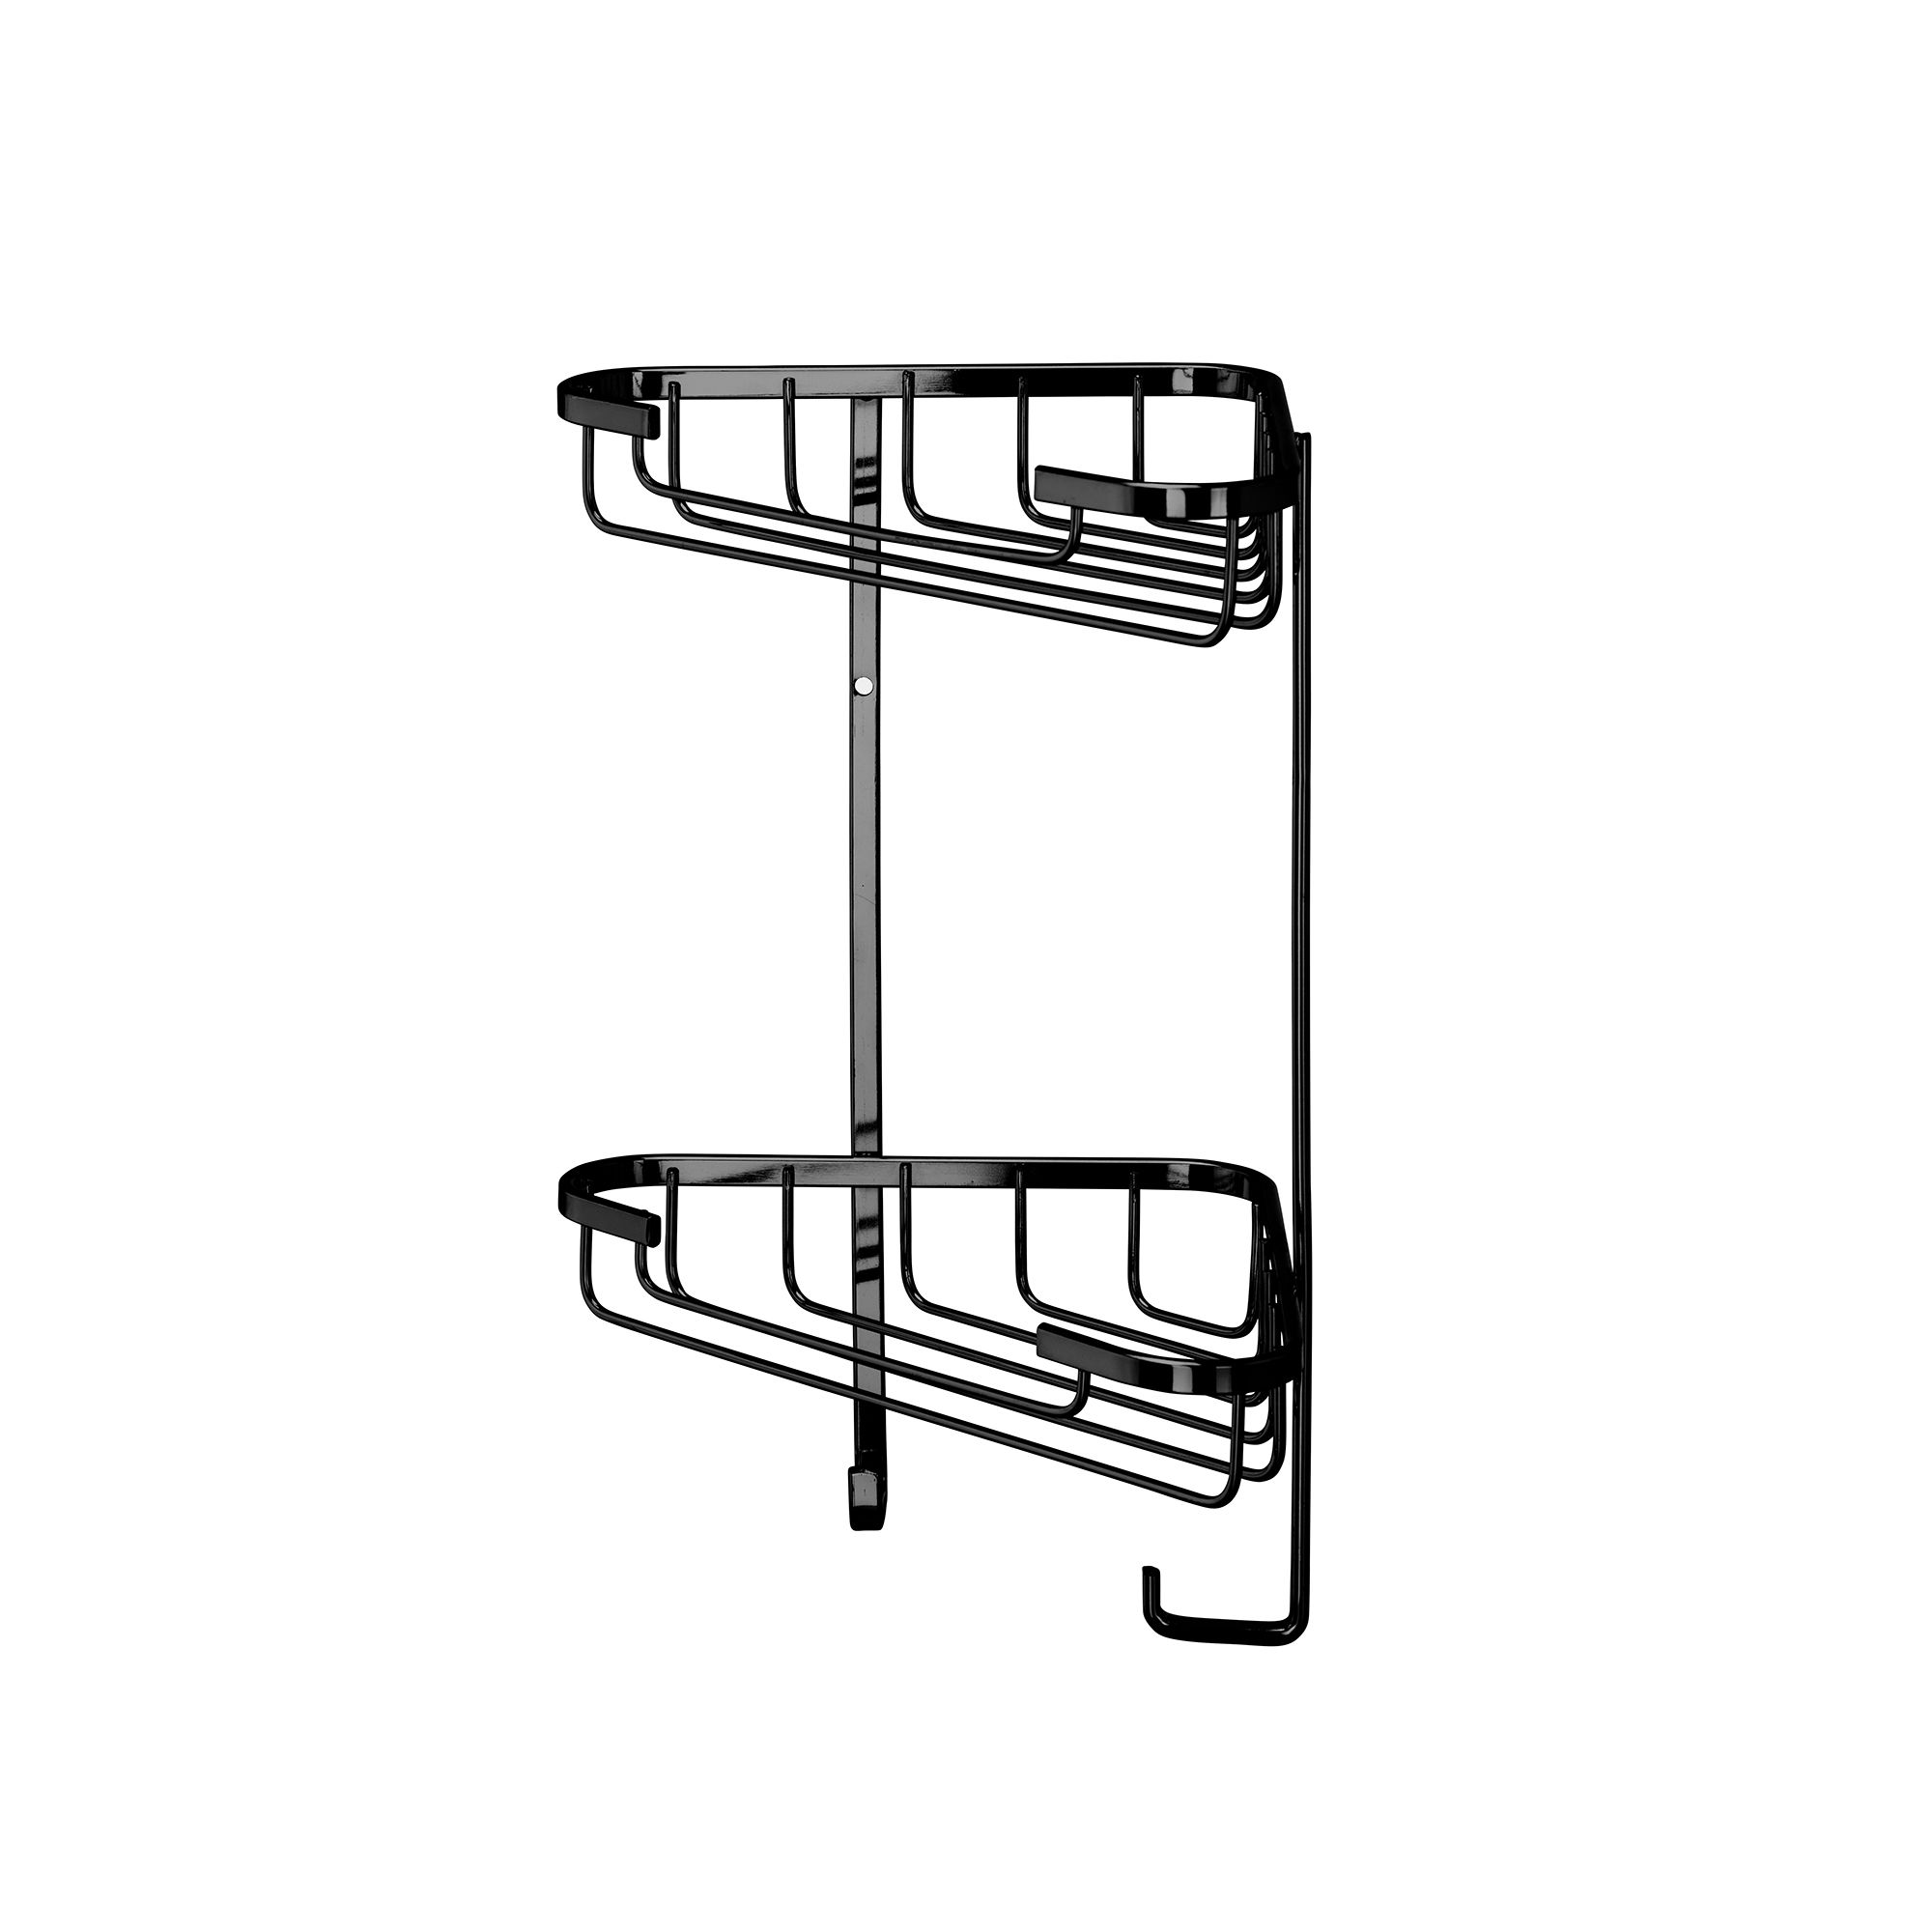 Powder Coated Steel 2 Tier Over the Door Shower Caddy, Chrome (As